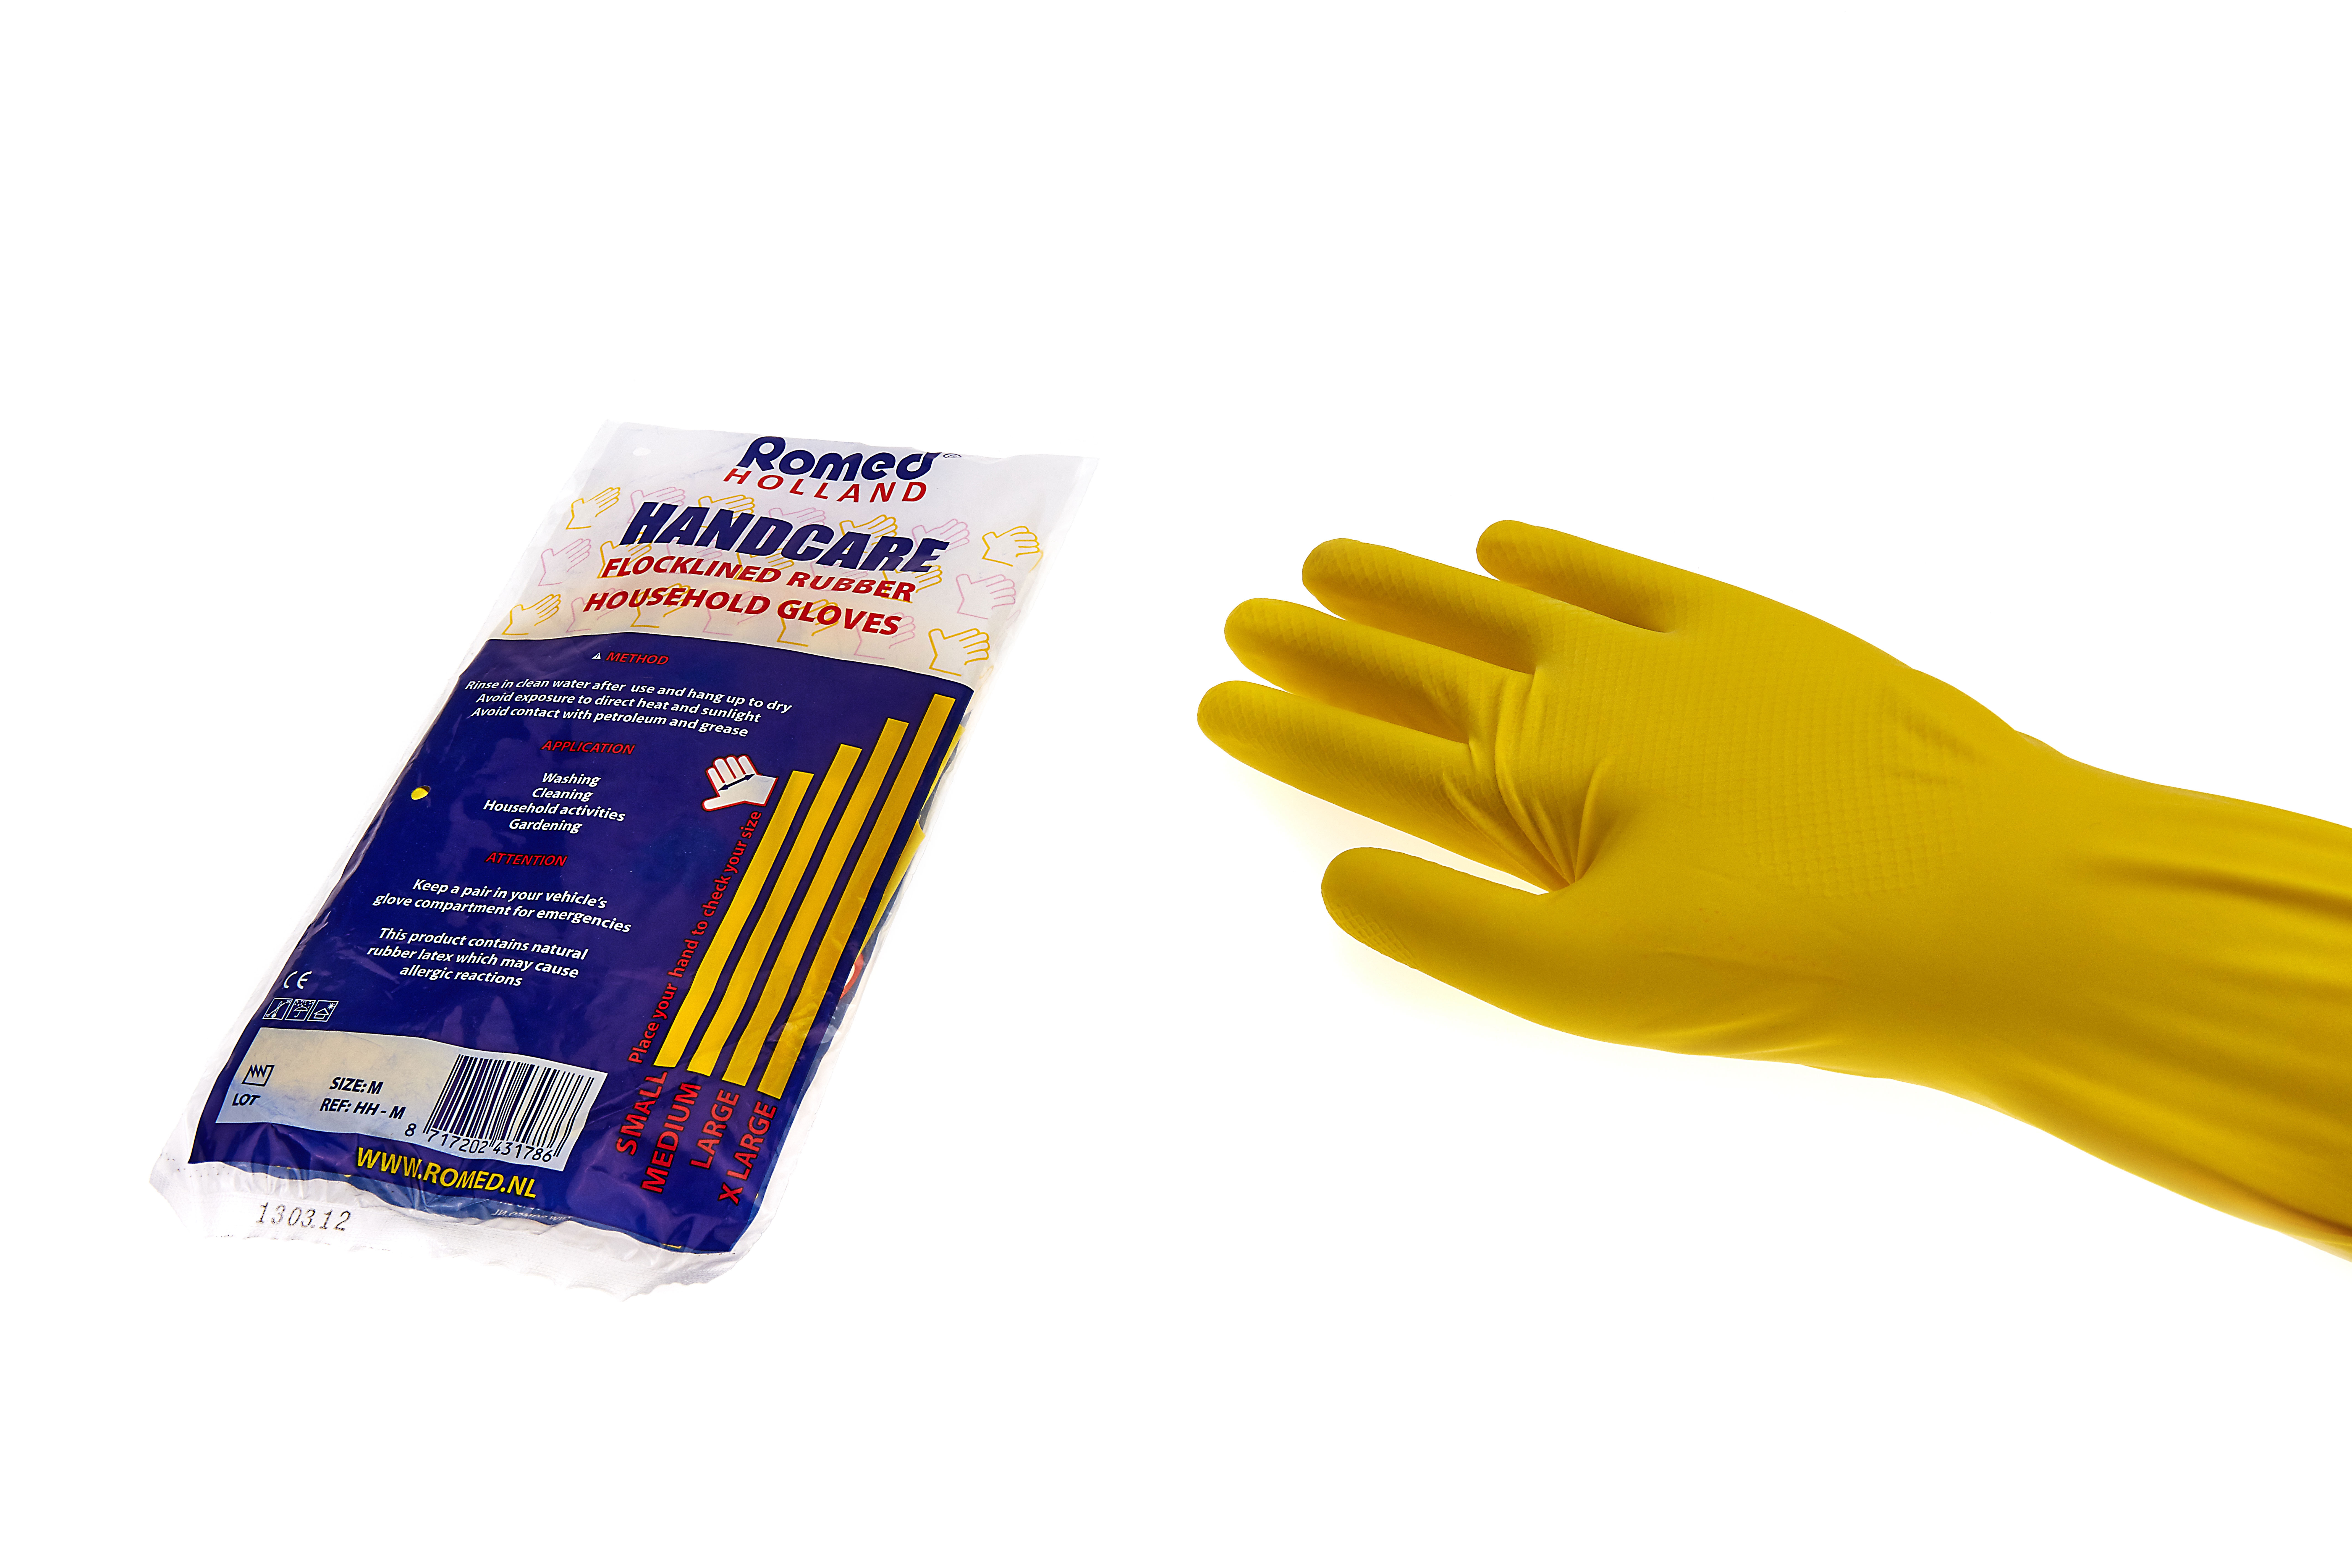 HH-XL Romed household gloves, per pair in a polybag, extra large, 12 polybags in a master polybag, 12 x 12 pairs = 144 pairs in a carton.